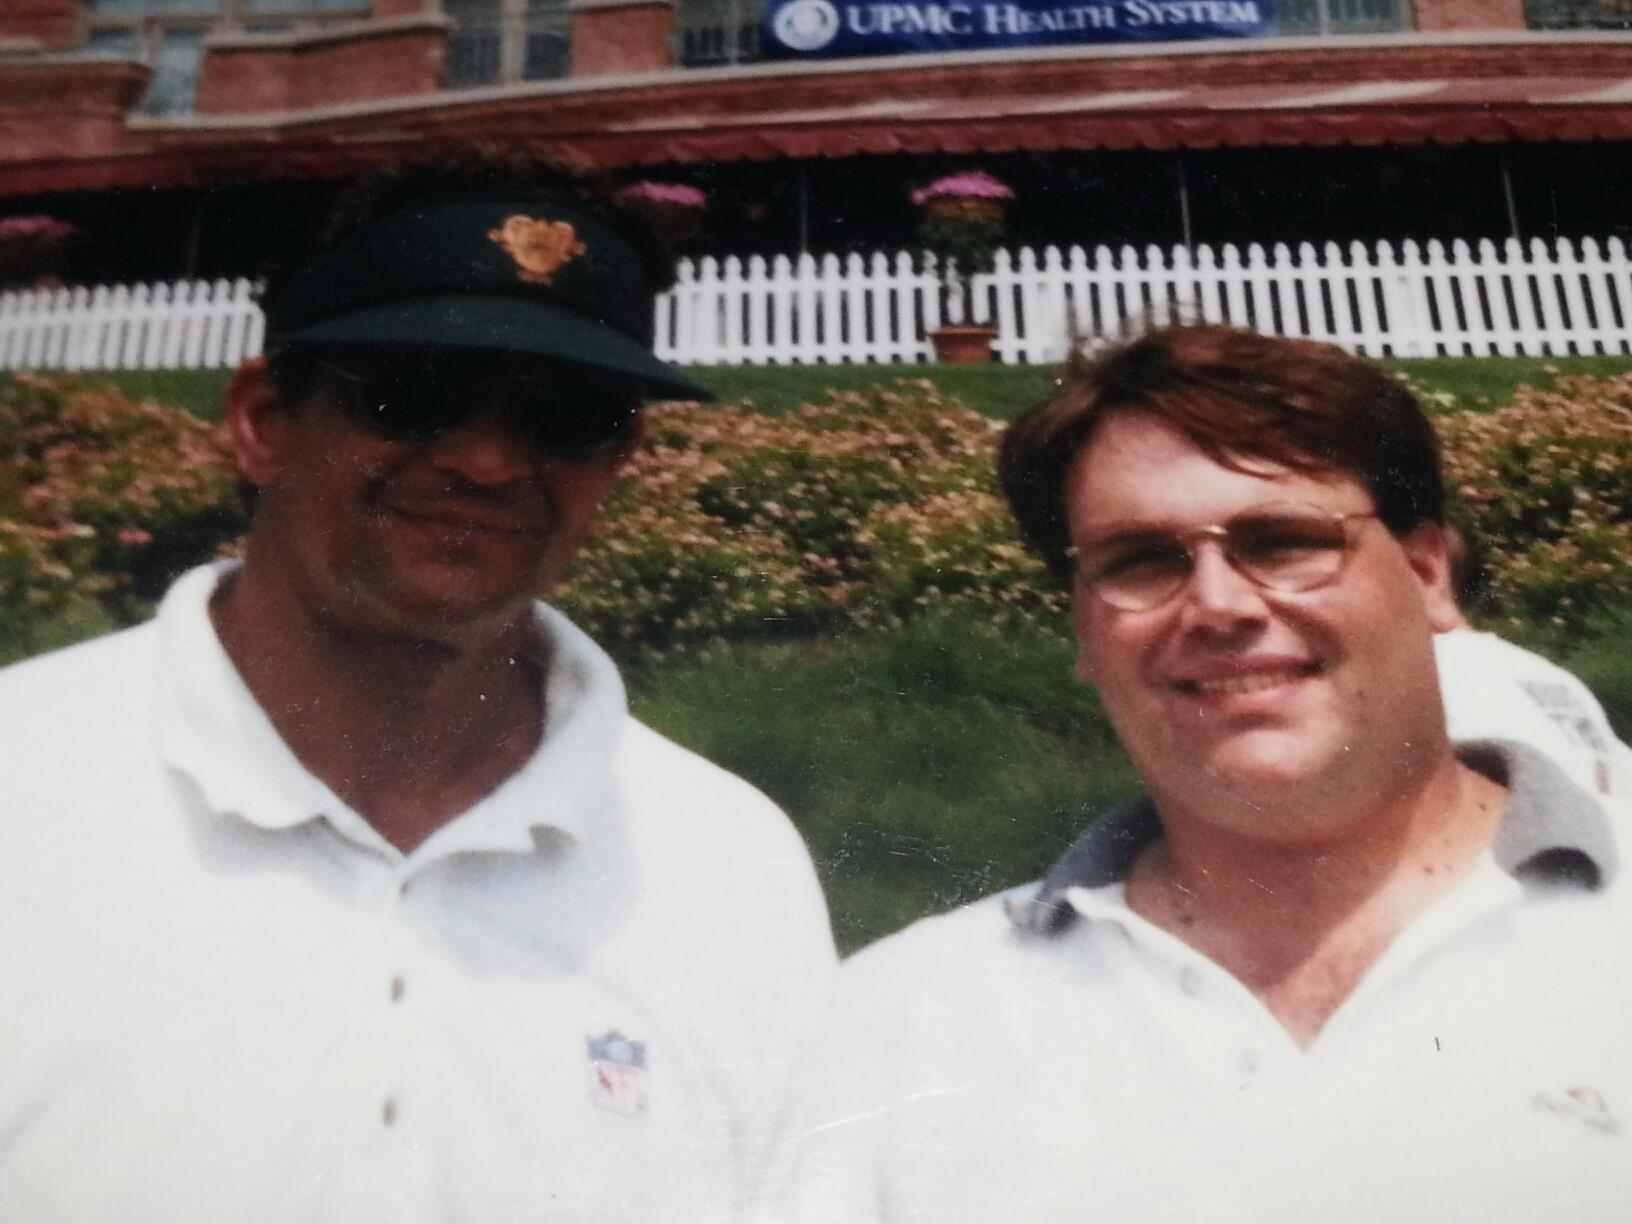 Me and Ed Marinaro from Hill St Blues.